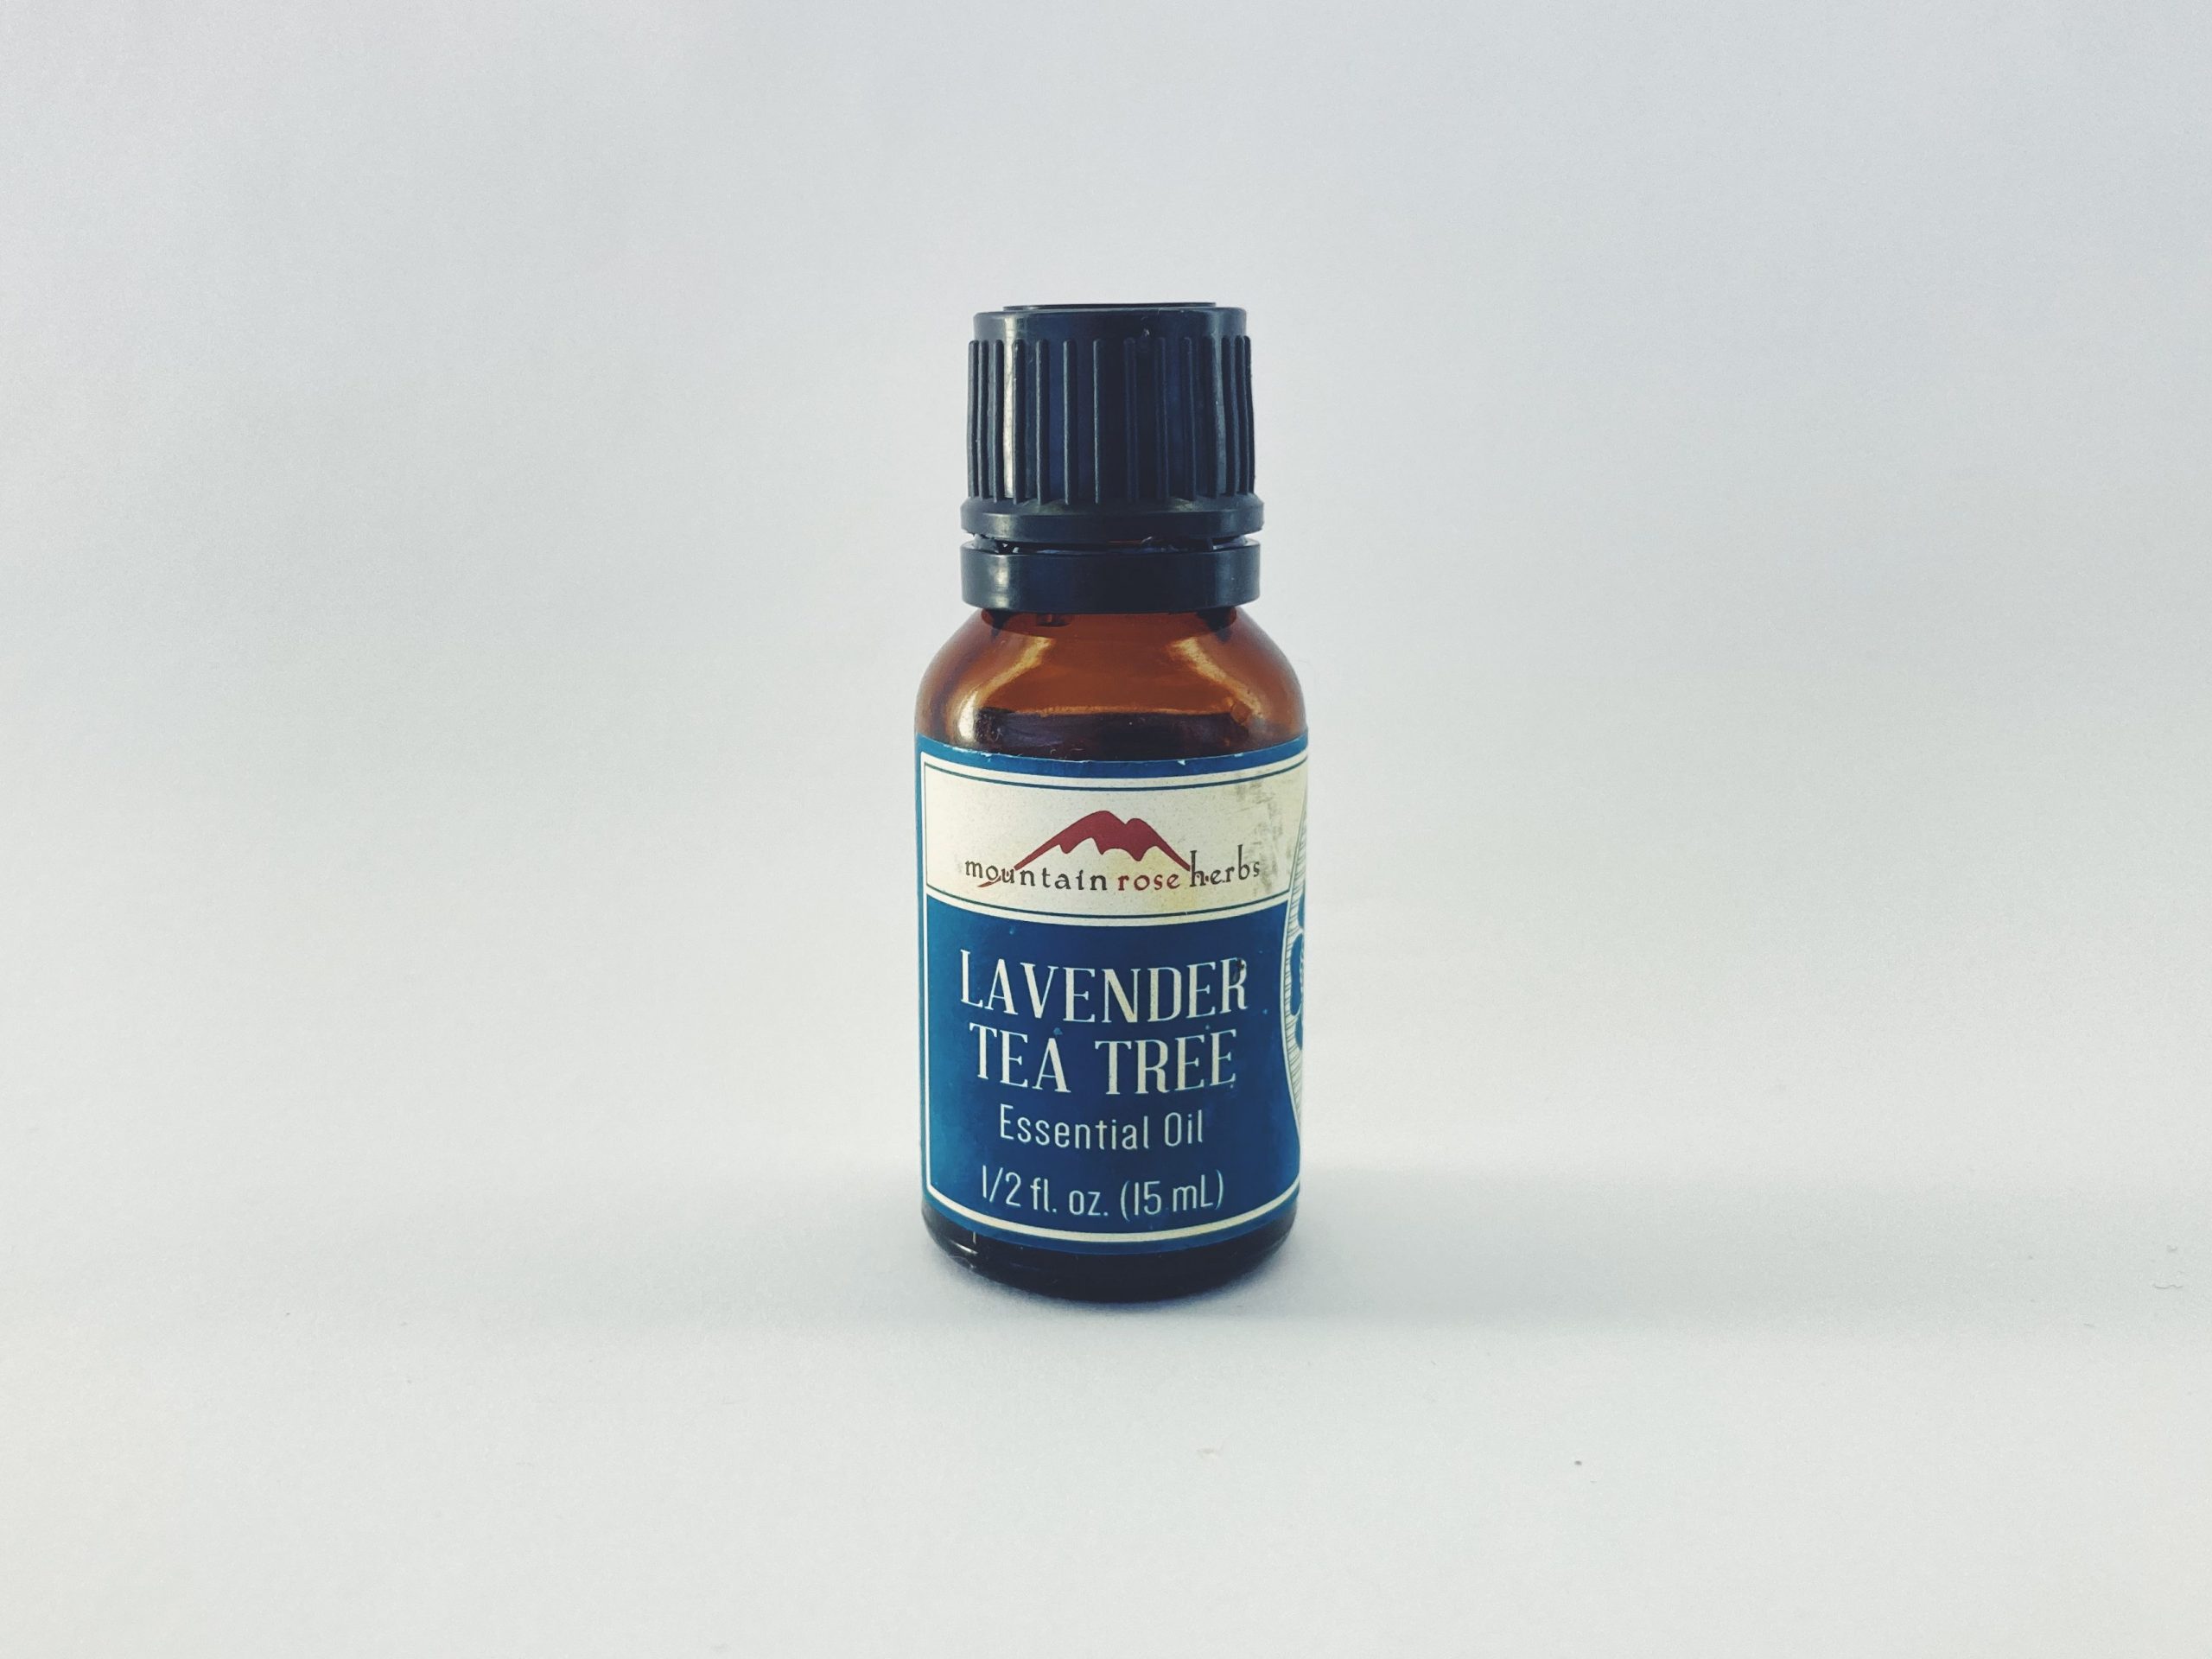 Small bottle of lavender tea tree essential oil on a white background.